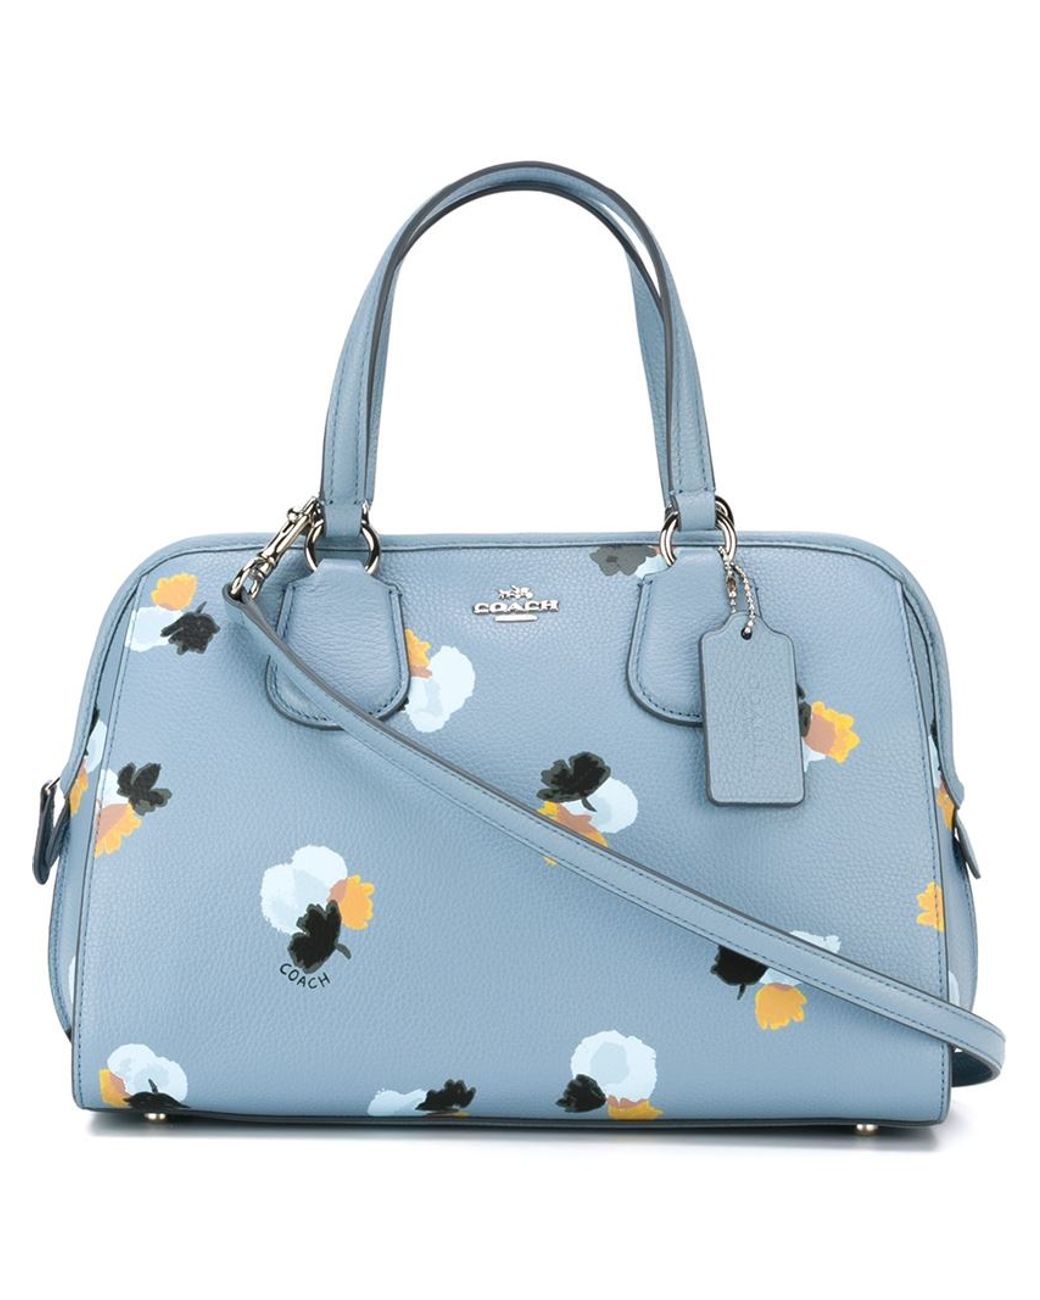 COACH Floral Print Tote Bag in Blue | Lyst